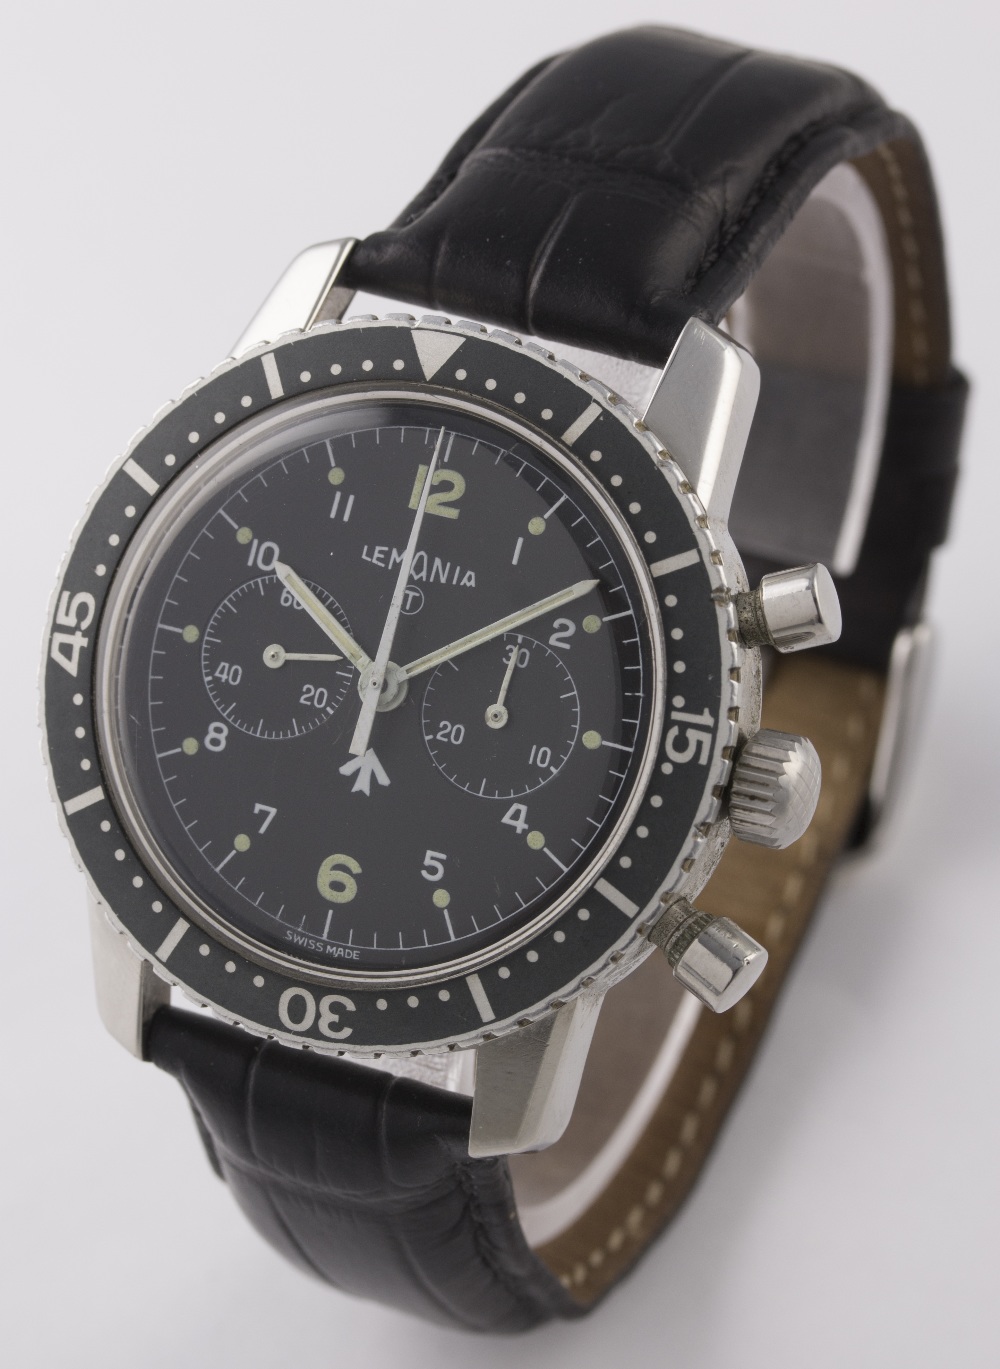 A RARE GENTLEMAN'S STAINLESS STEEL SOUTH AFRICAN AIR FORCE LEMANIA PILOTS MILITARY CHRONOGRAPH WRIST - Image 4 of 8